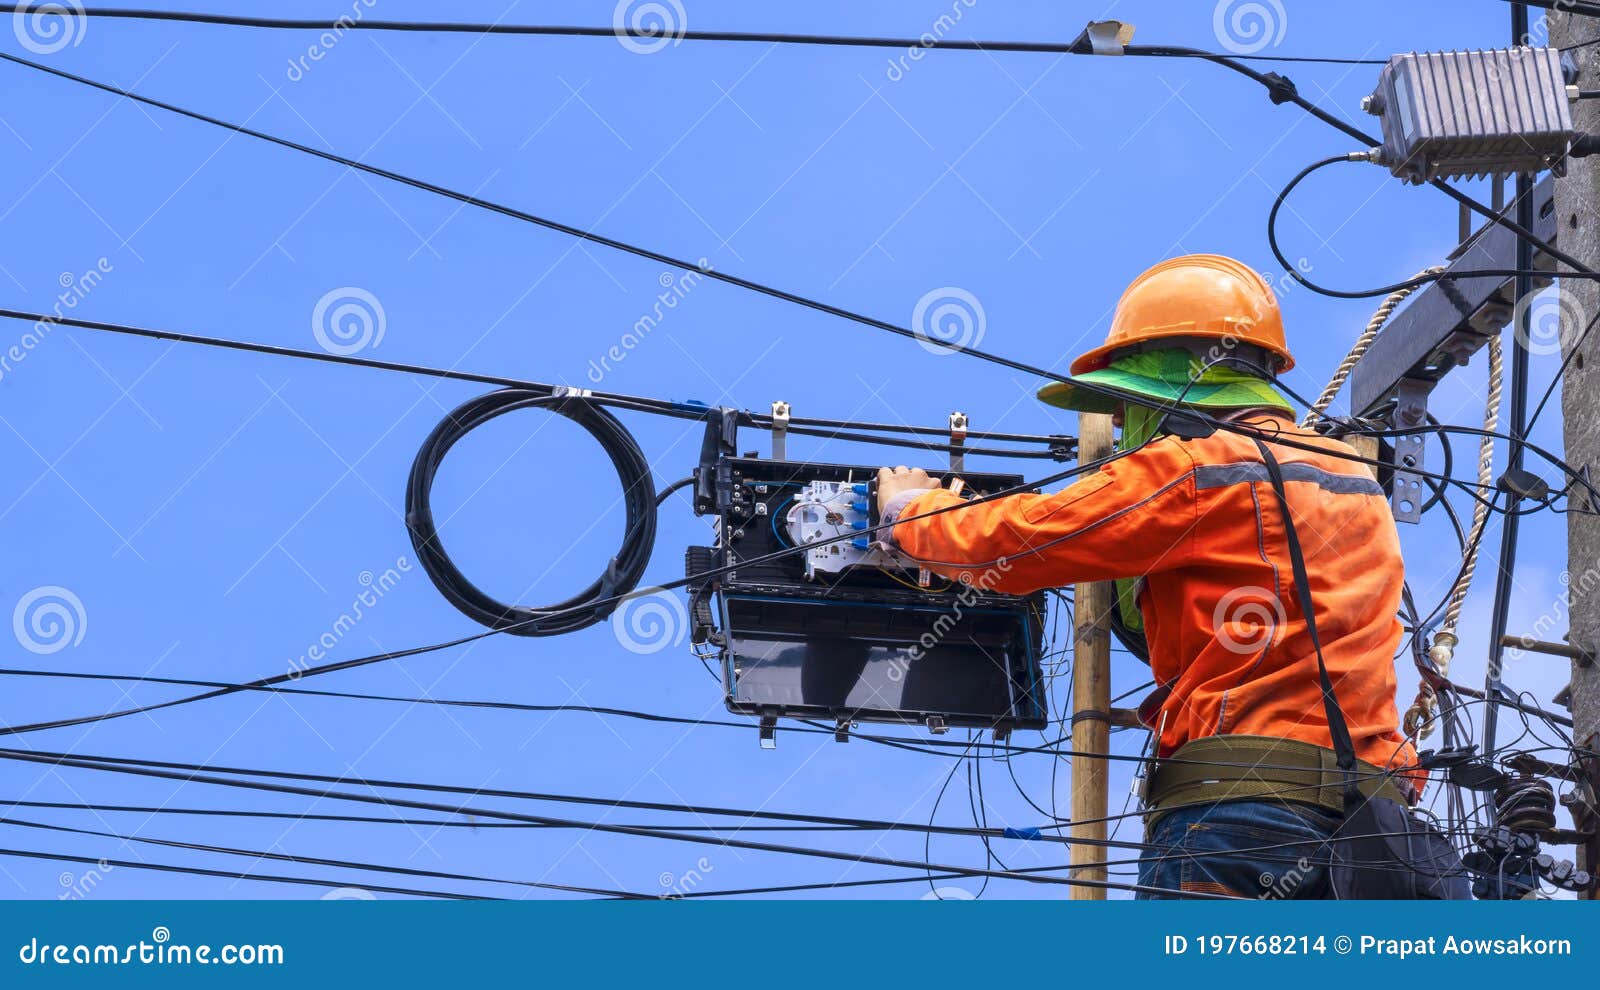 technician on wooden ladder is working to install fiber optic and splitter box on power pole against blue sky